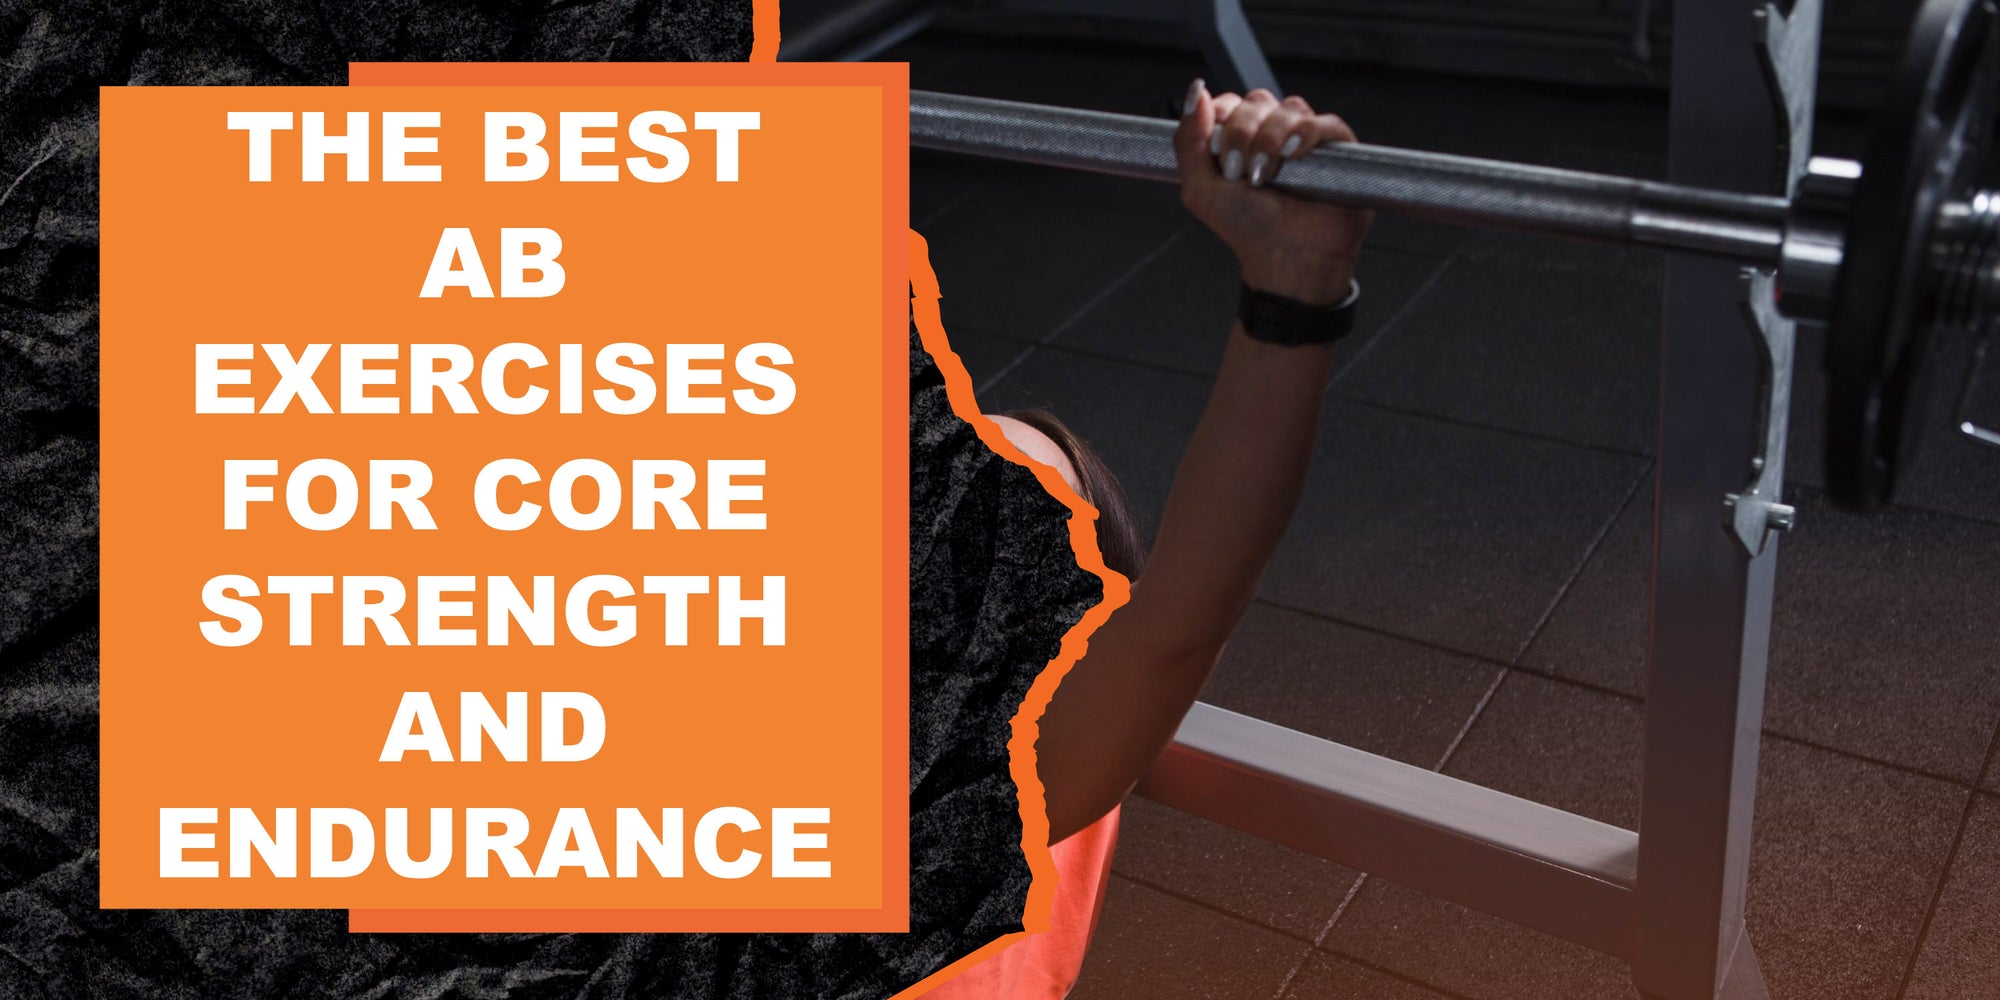 The Best Ab Exercises for Core Strength and Endurance